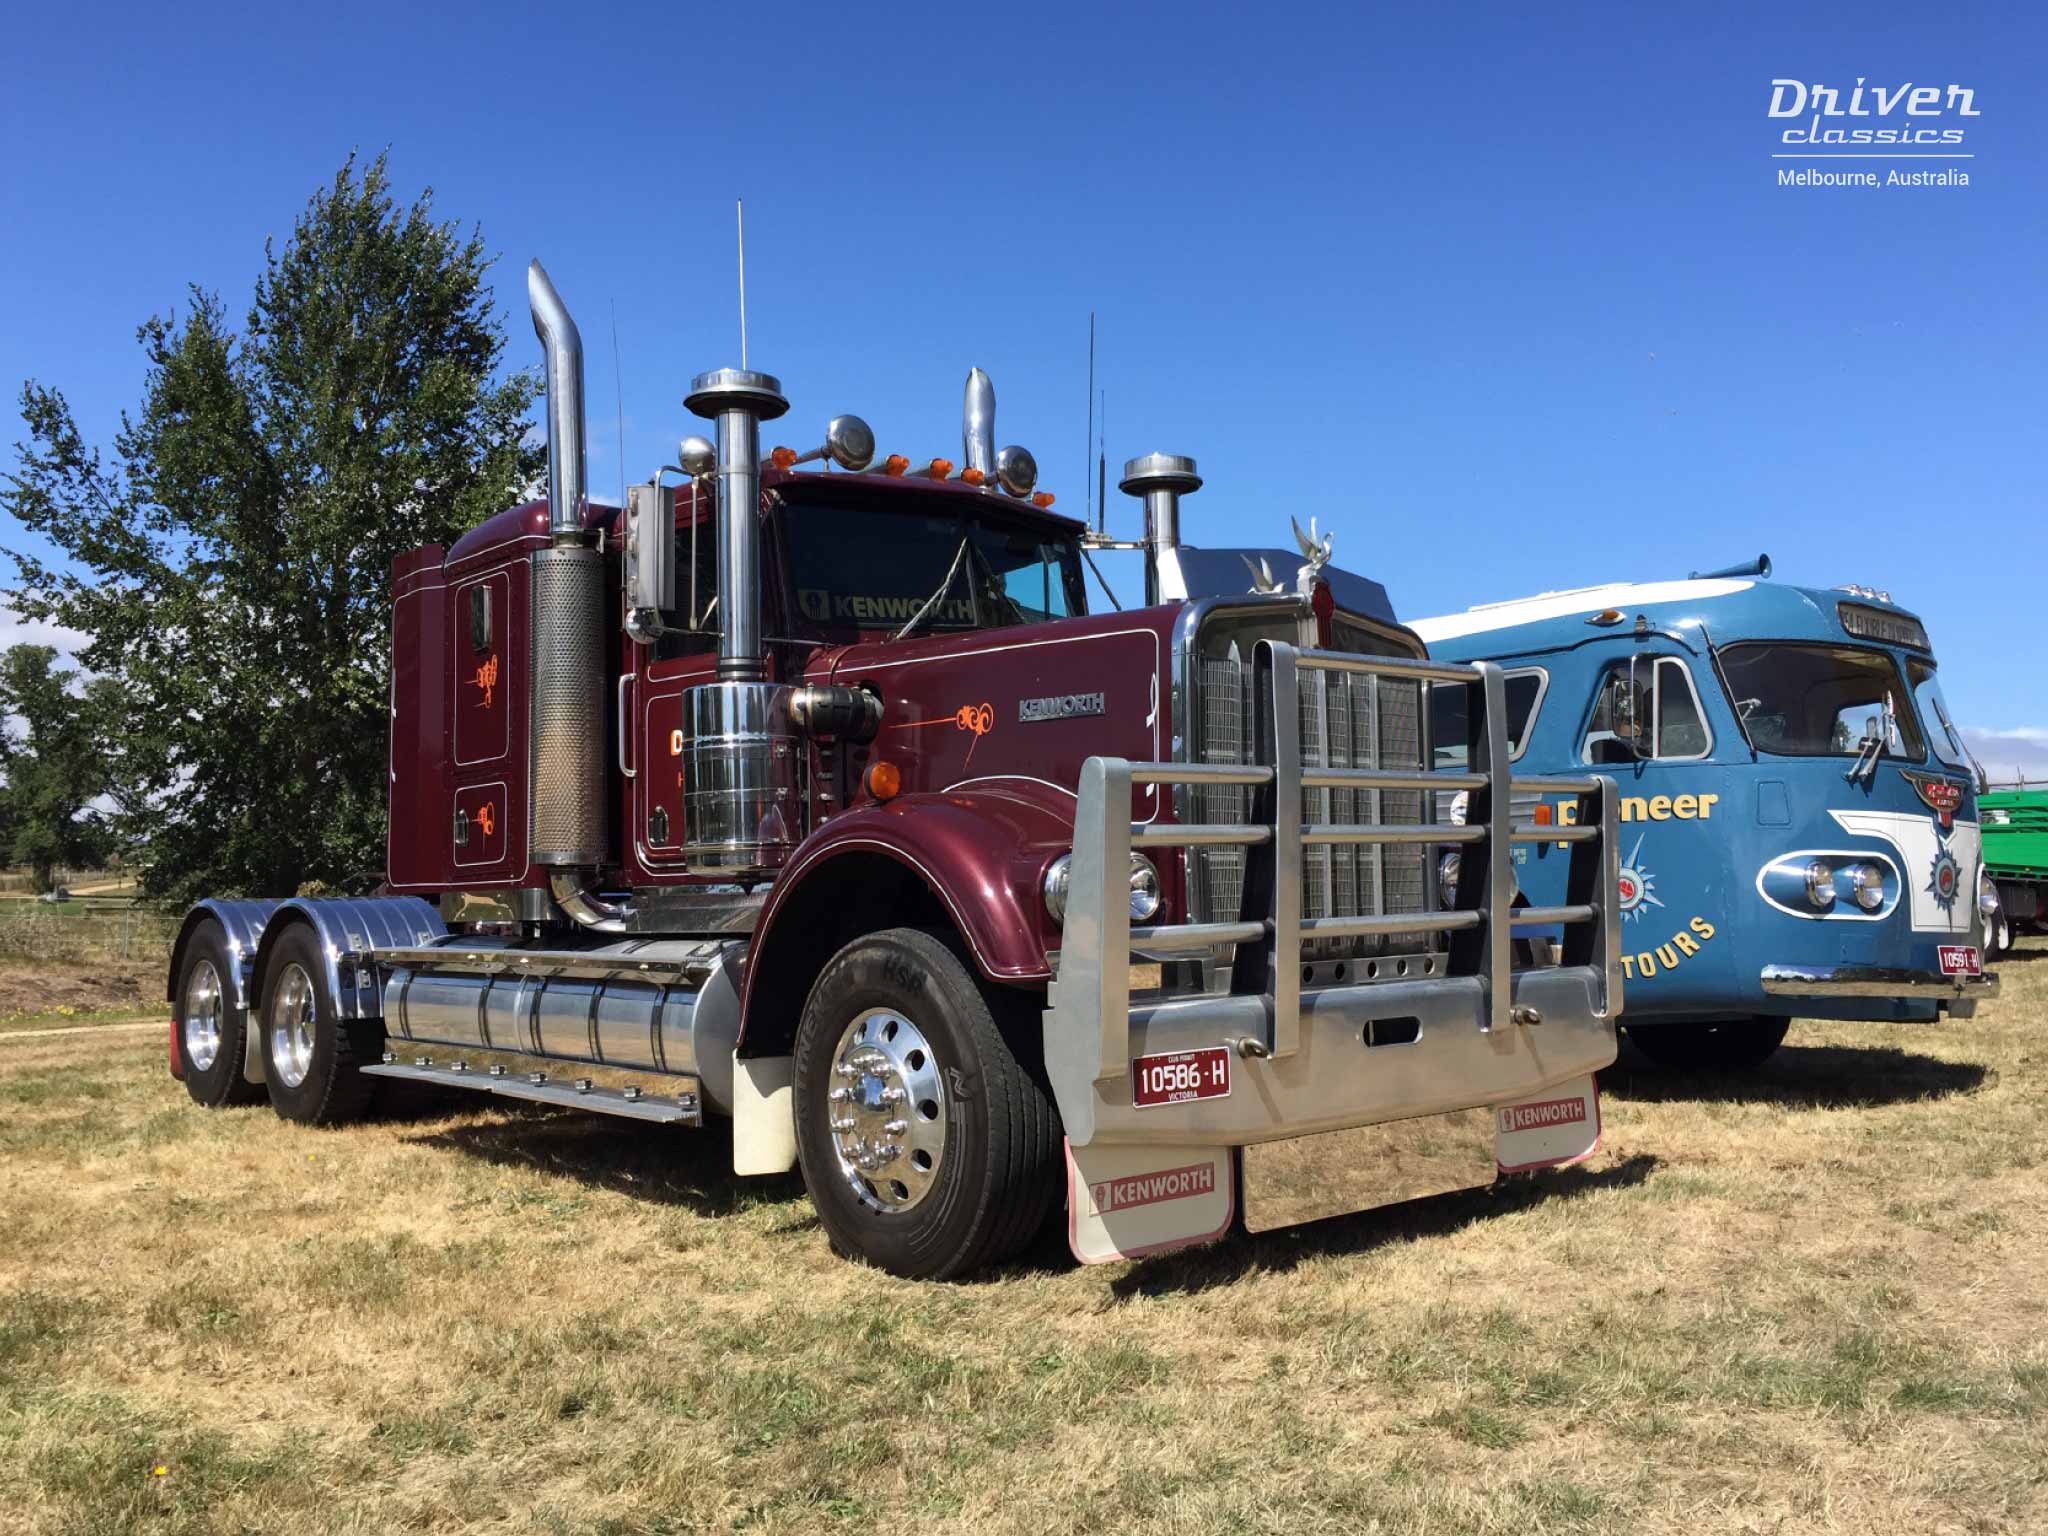 Kenworth W925 1986 version and Flxible Clipper 1954 version, at Lancefield VIC, Feb 2018